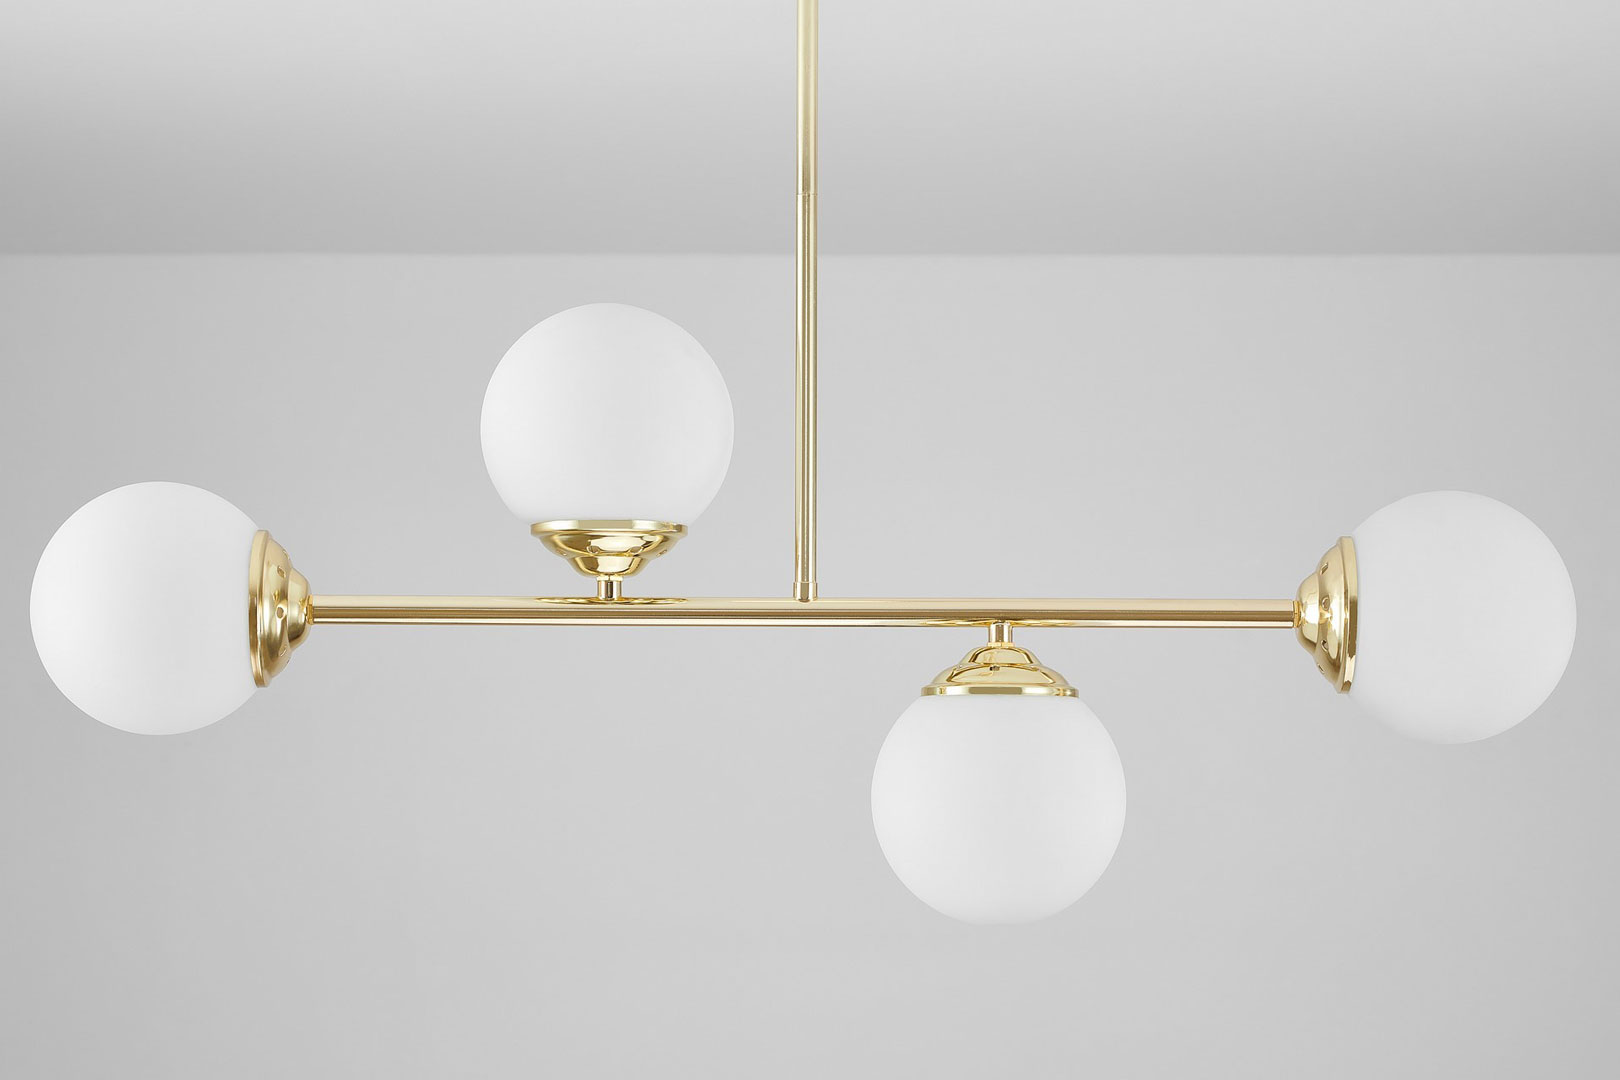 Gold tube pendant lamp with white glass globe shades, classic gold - FINO - Lampit image 4